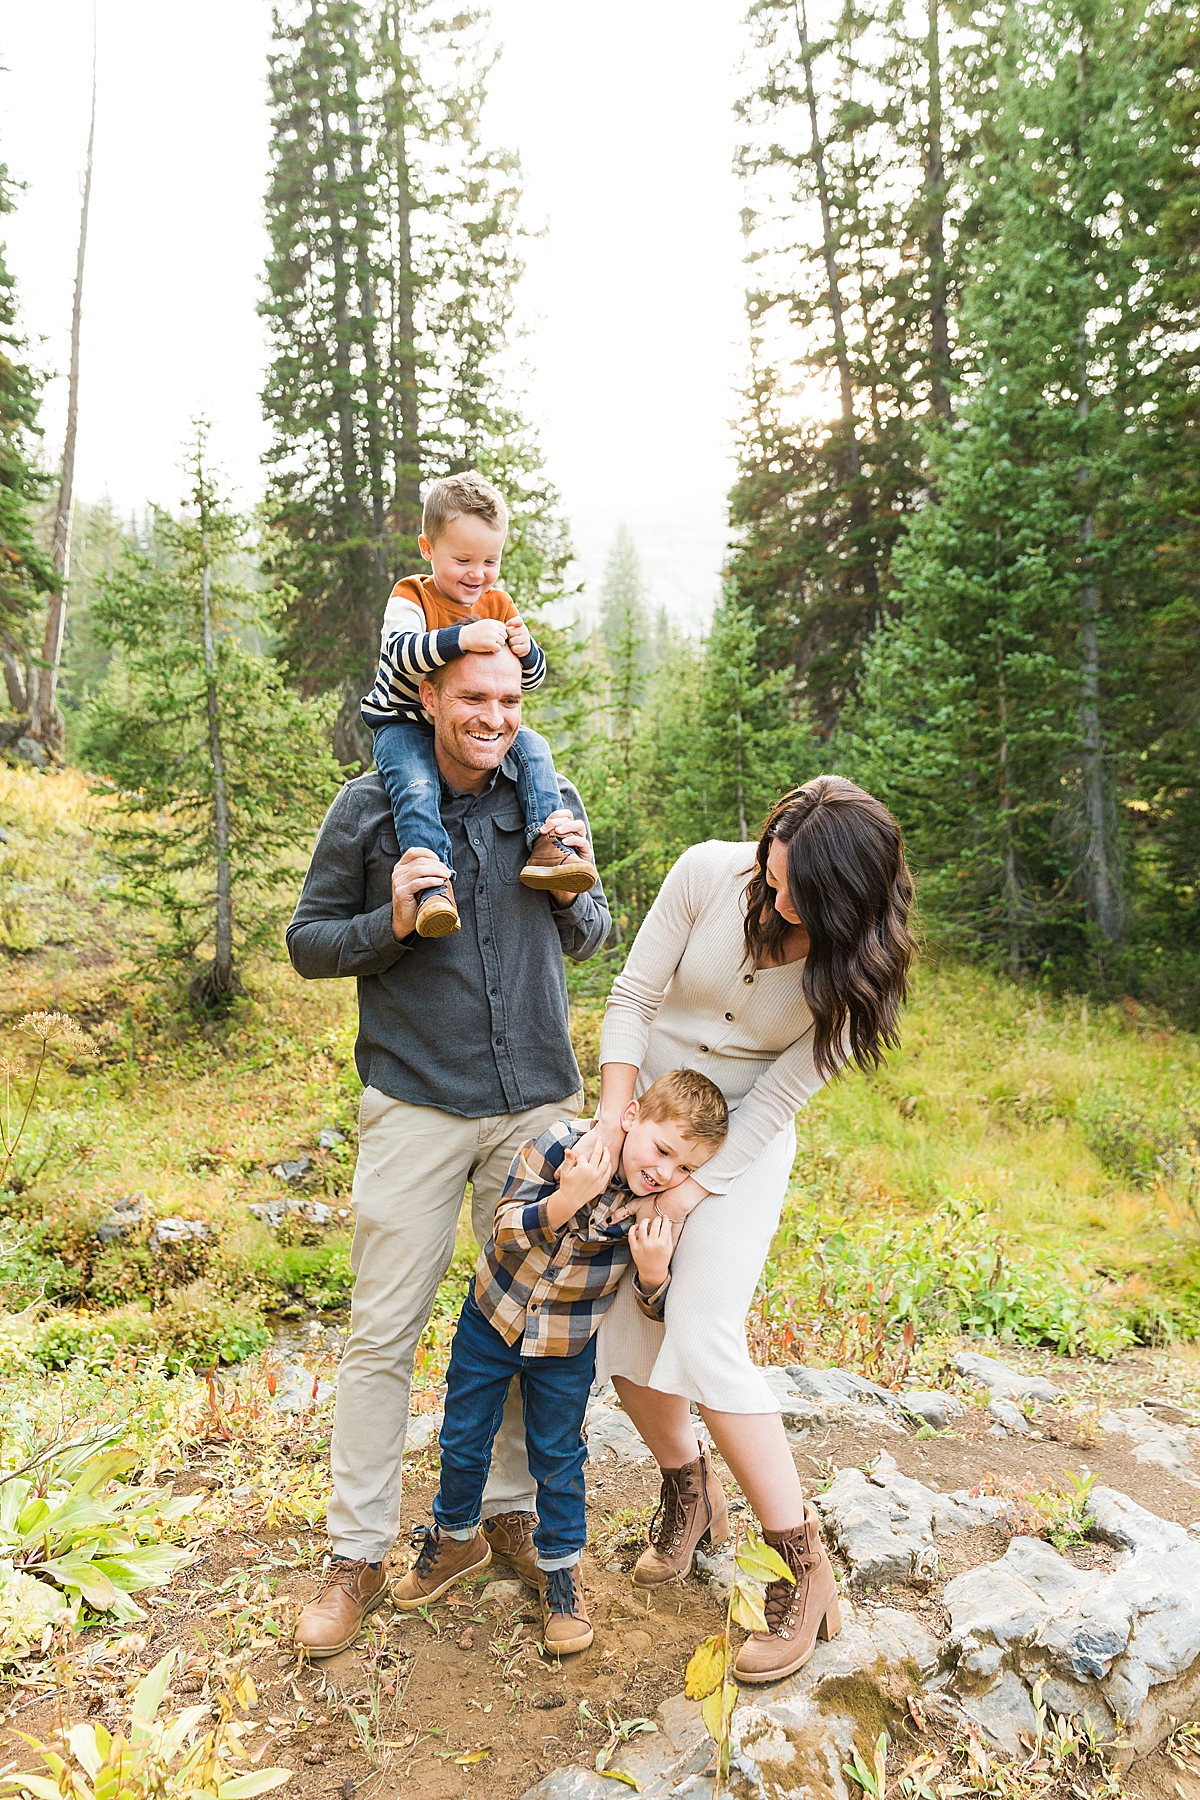 Leah Hope Photography | Salt Lake City Utah Family Photos | Green Nature | Family Pictures | What to Wear | Family Posing Poses | Scottsdale Photographer | Family Child Photographer | Outfits and Styling Ideas | Family Photography | Playful Candid Pictures | Mountain Photos | Albion Basin | Forest Scenery